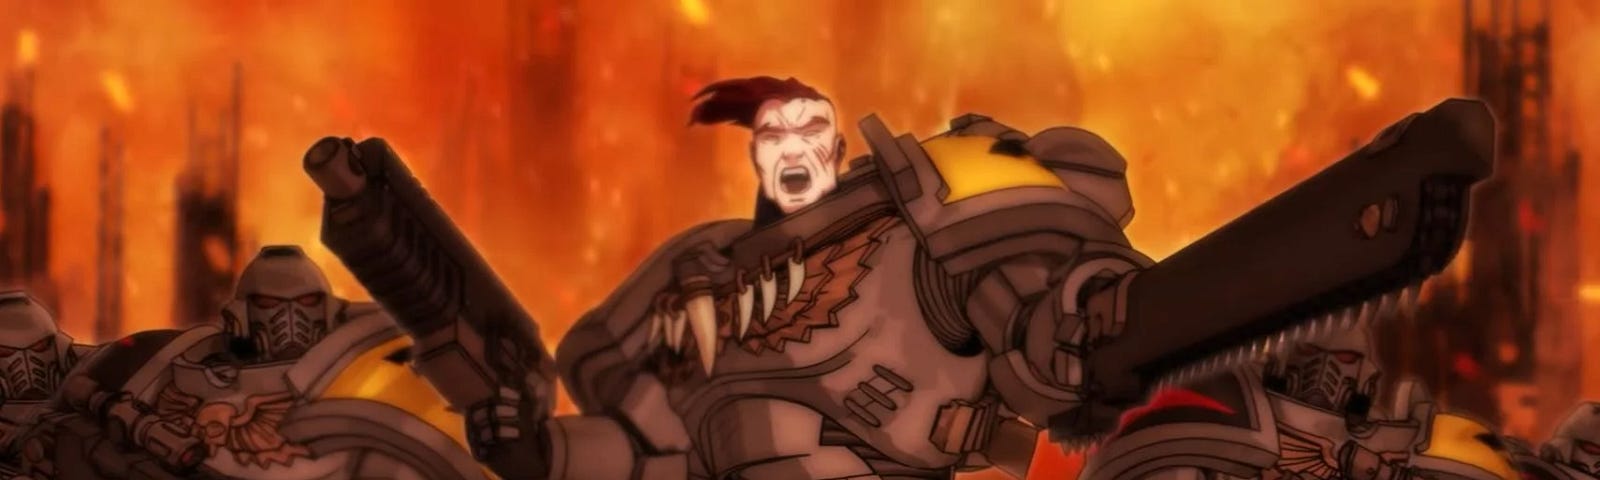 An animated image of five Space Wolves space marines. They all were bulky grey-blue powered armor. All but the center marine were helmets. The center marine points a chainsaw-sword past the camera and holds a sci-fi gun, a bolter, in the other hand. The other Space Wolves carry bolters. A city is on fire behind them. The image is likely from the Hammer and Bolter episode “Fangs”.